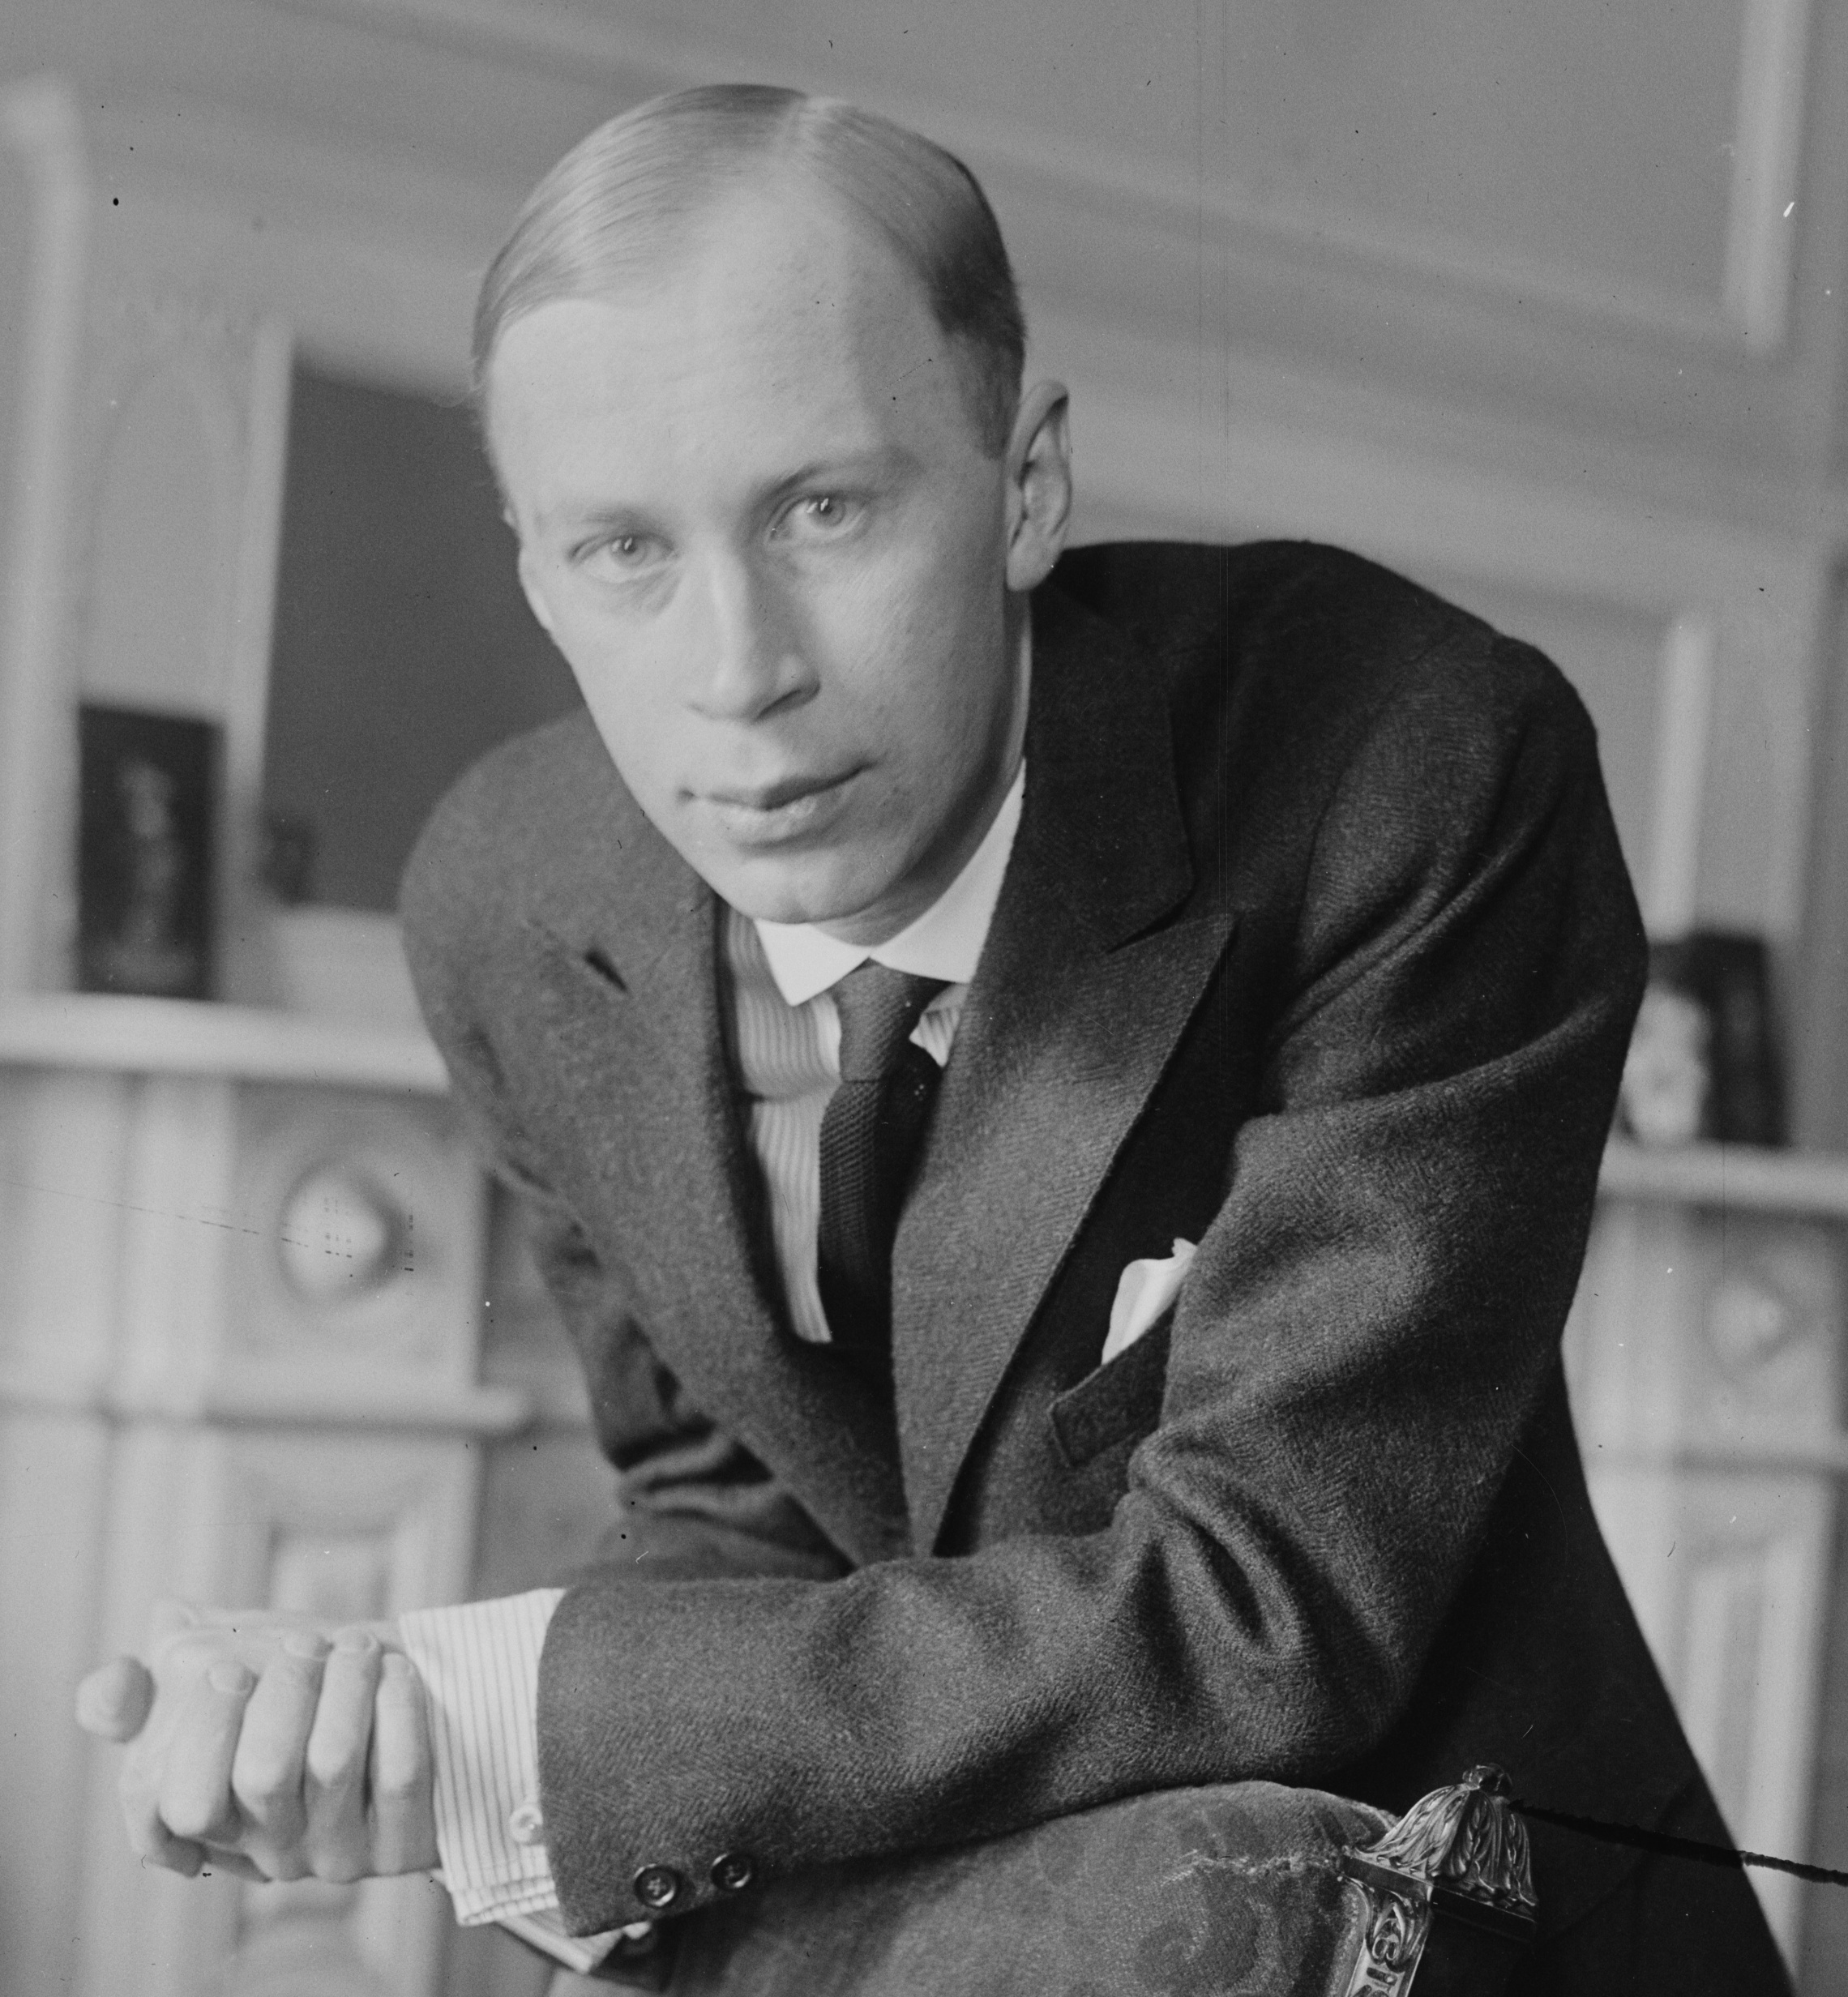 Sergei Prokofiev in New York, 1918, United States Library of Congress's Prints and Photographs division under the digital ID ggbain.28258